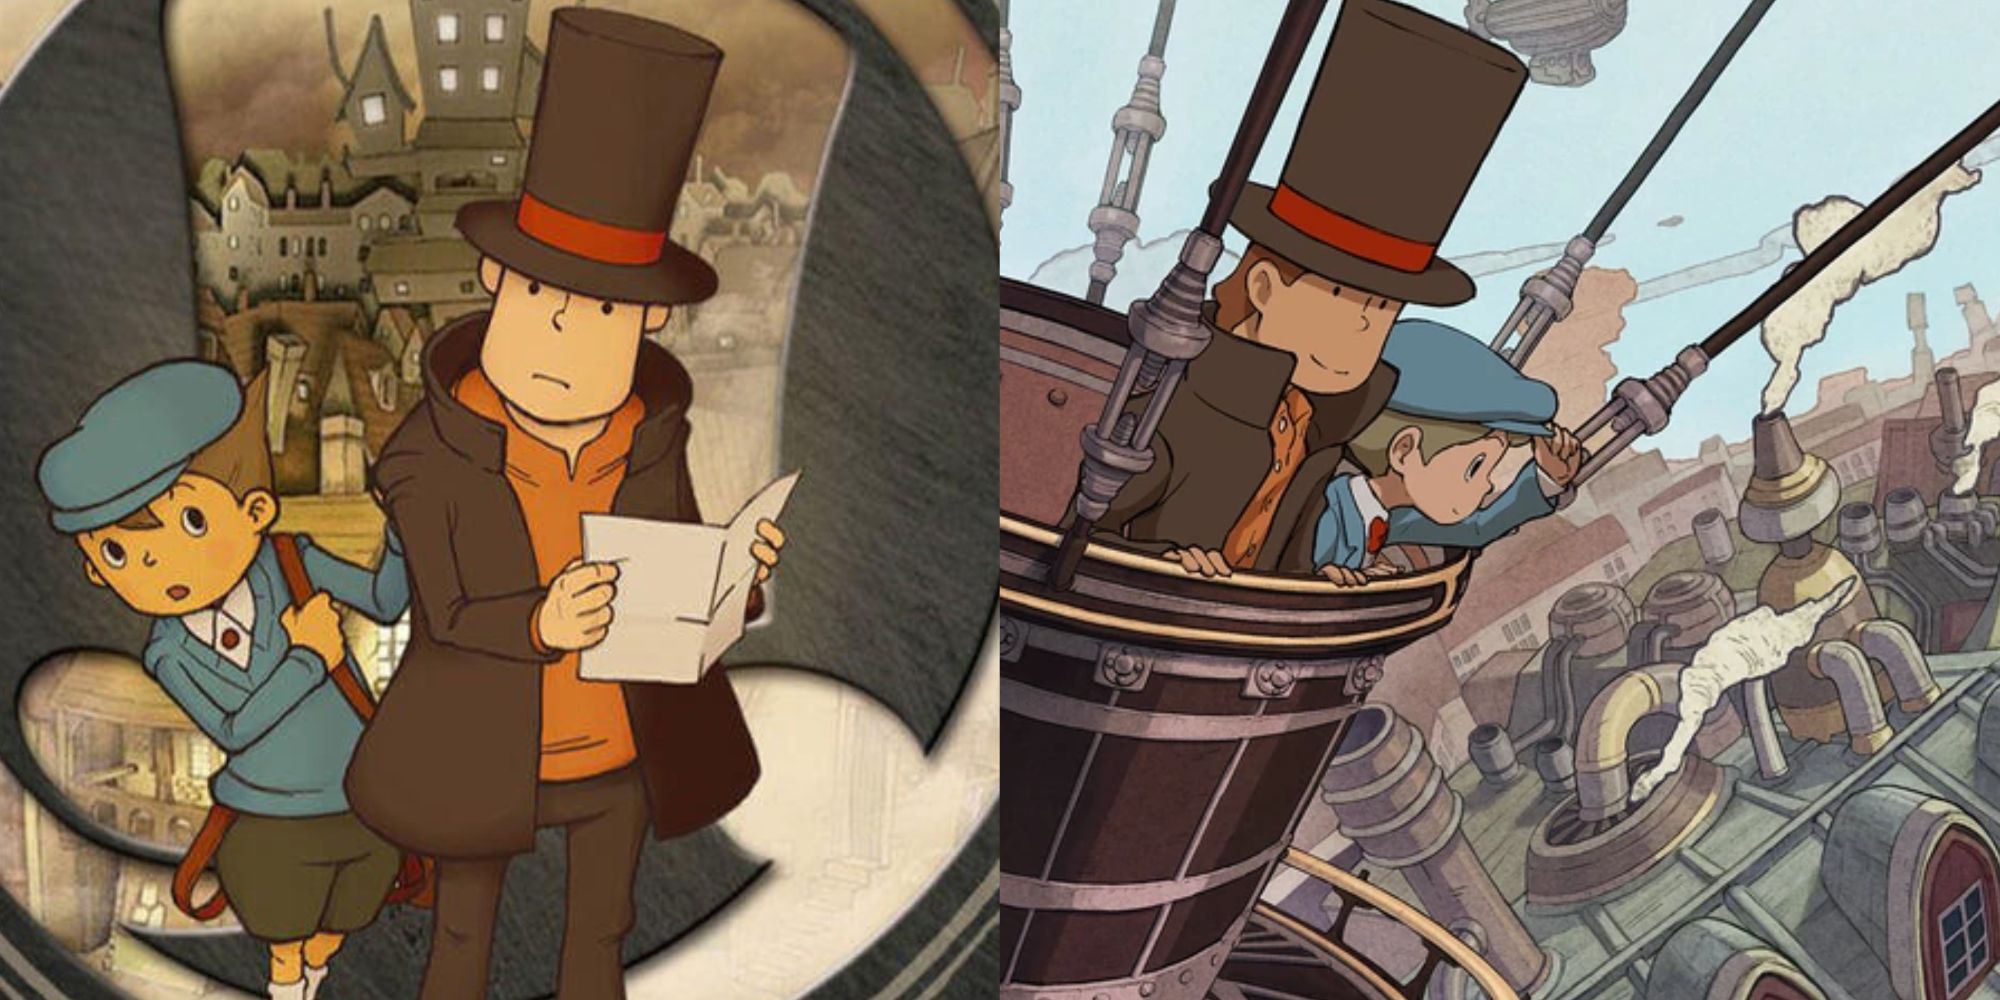 Professor Layton is back after six years, and so are his fans